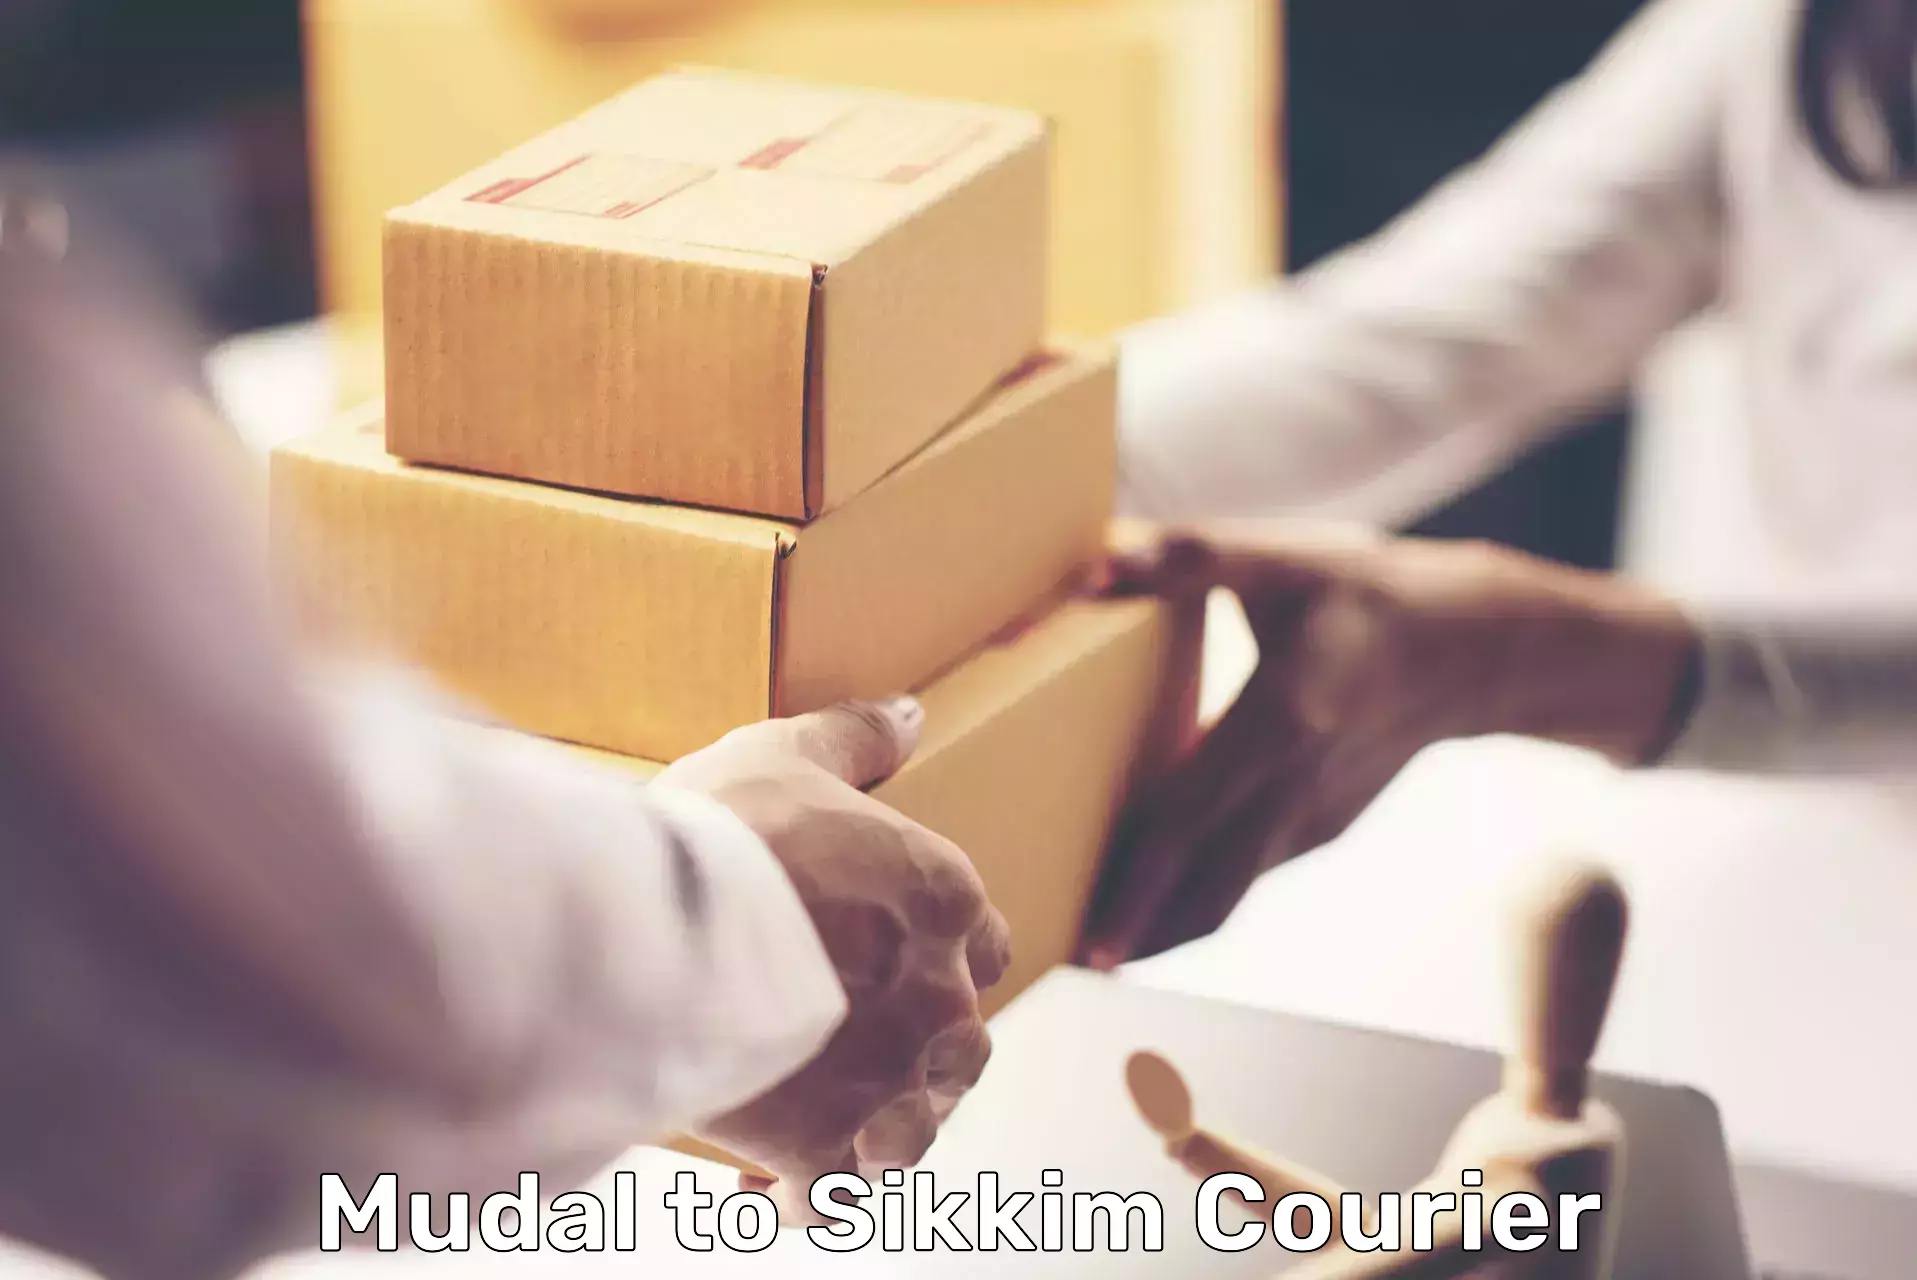 On-call courier service Mudal to Sikkim